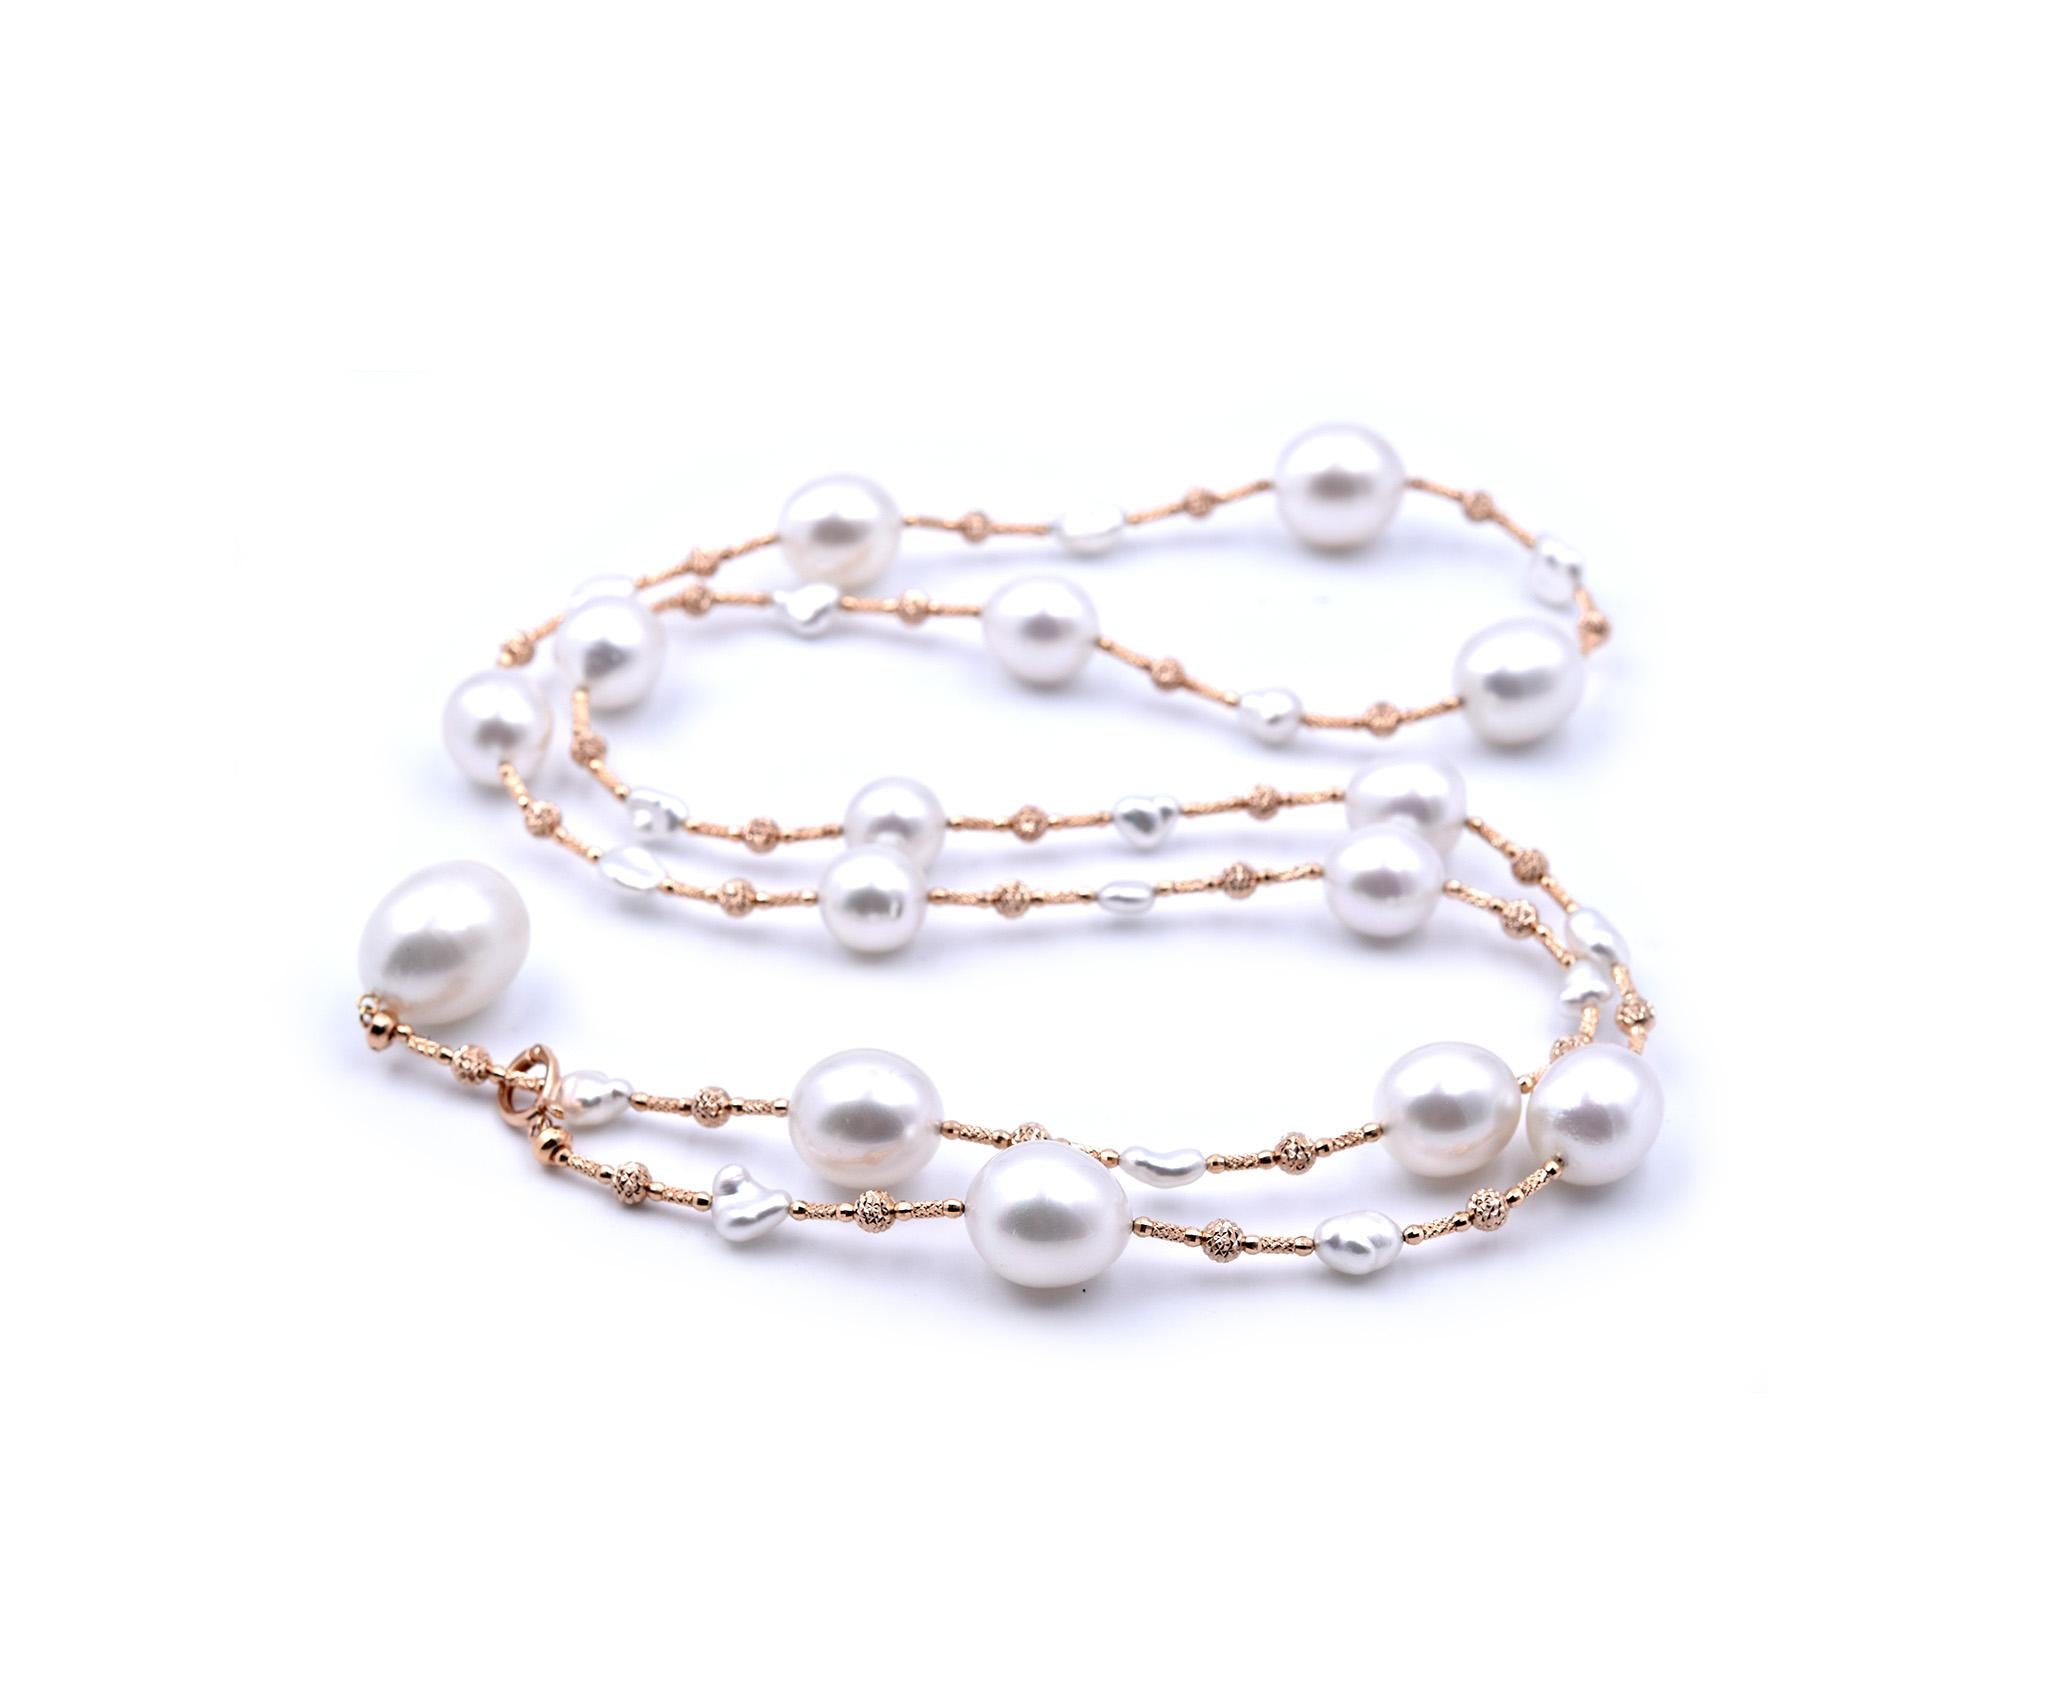 Designer: custom 
Material: 18k rose gold
Pearls: natural South Sea pearls range from 14mm – 11mm
Dimensions: necklace is 32 inches long 
Weight: 59.77 grams
